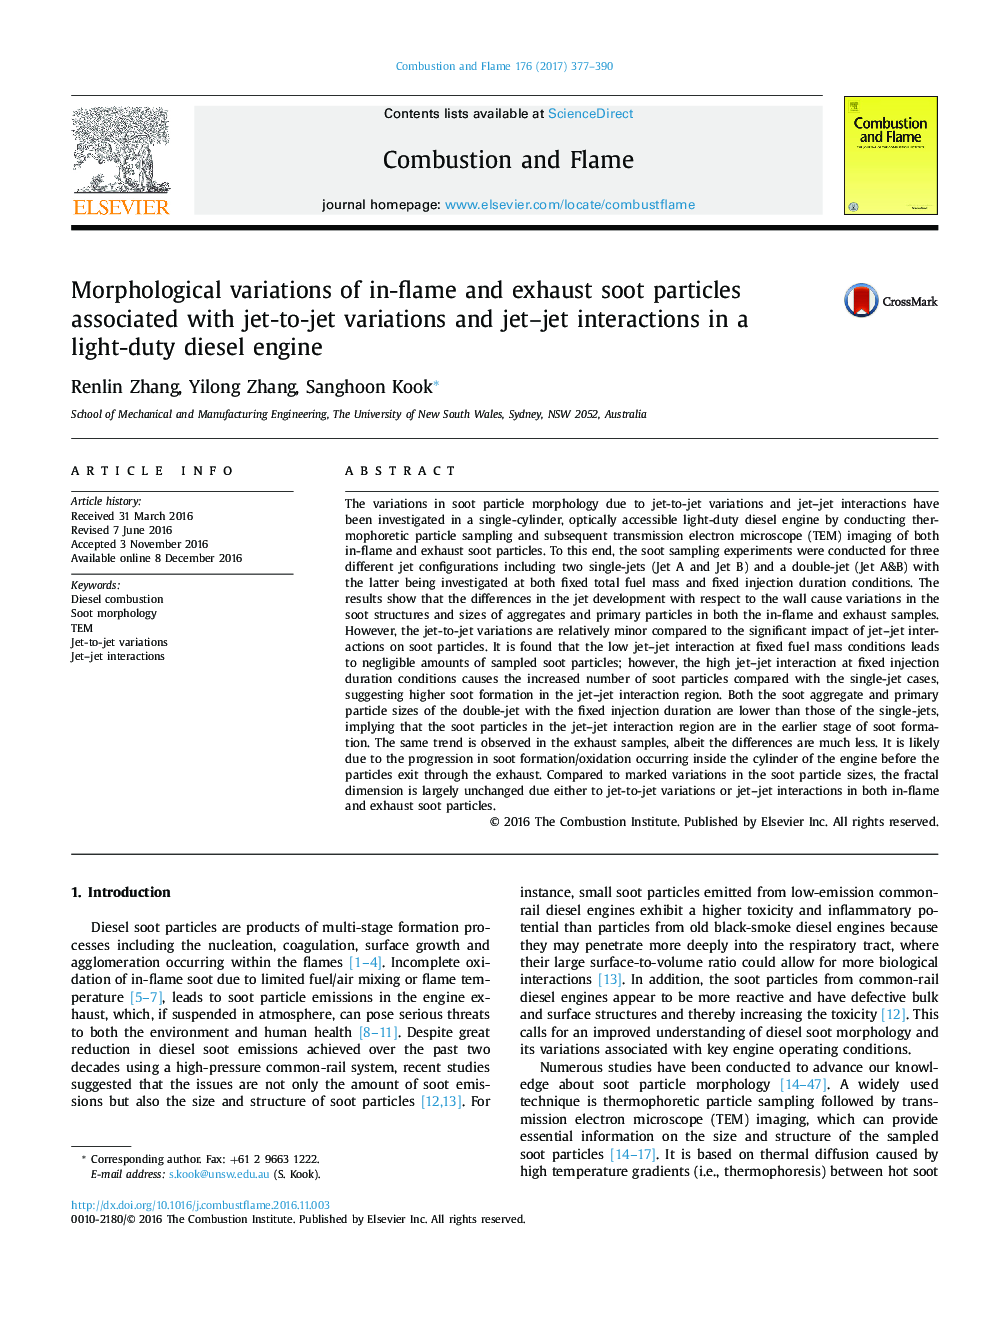 Morphological variations of in-flame and exhaust soot particles associated with jet-to-jet variations and jet-jet interactions in a light-duty diesel engine